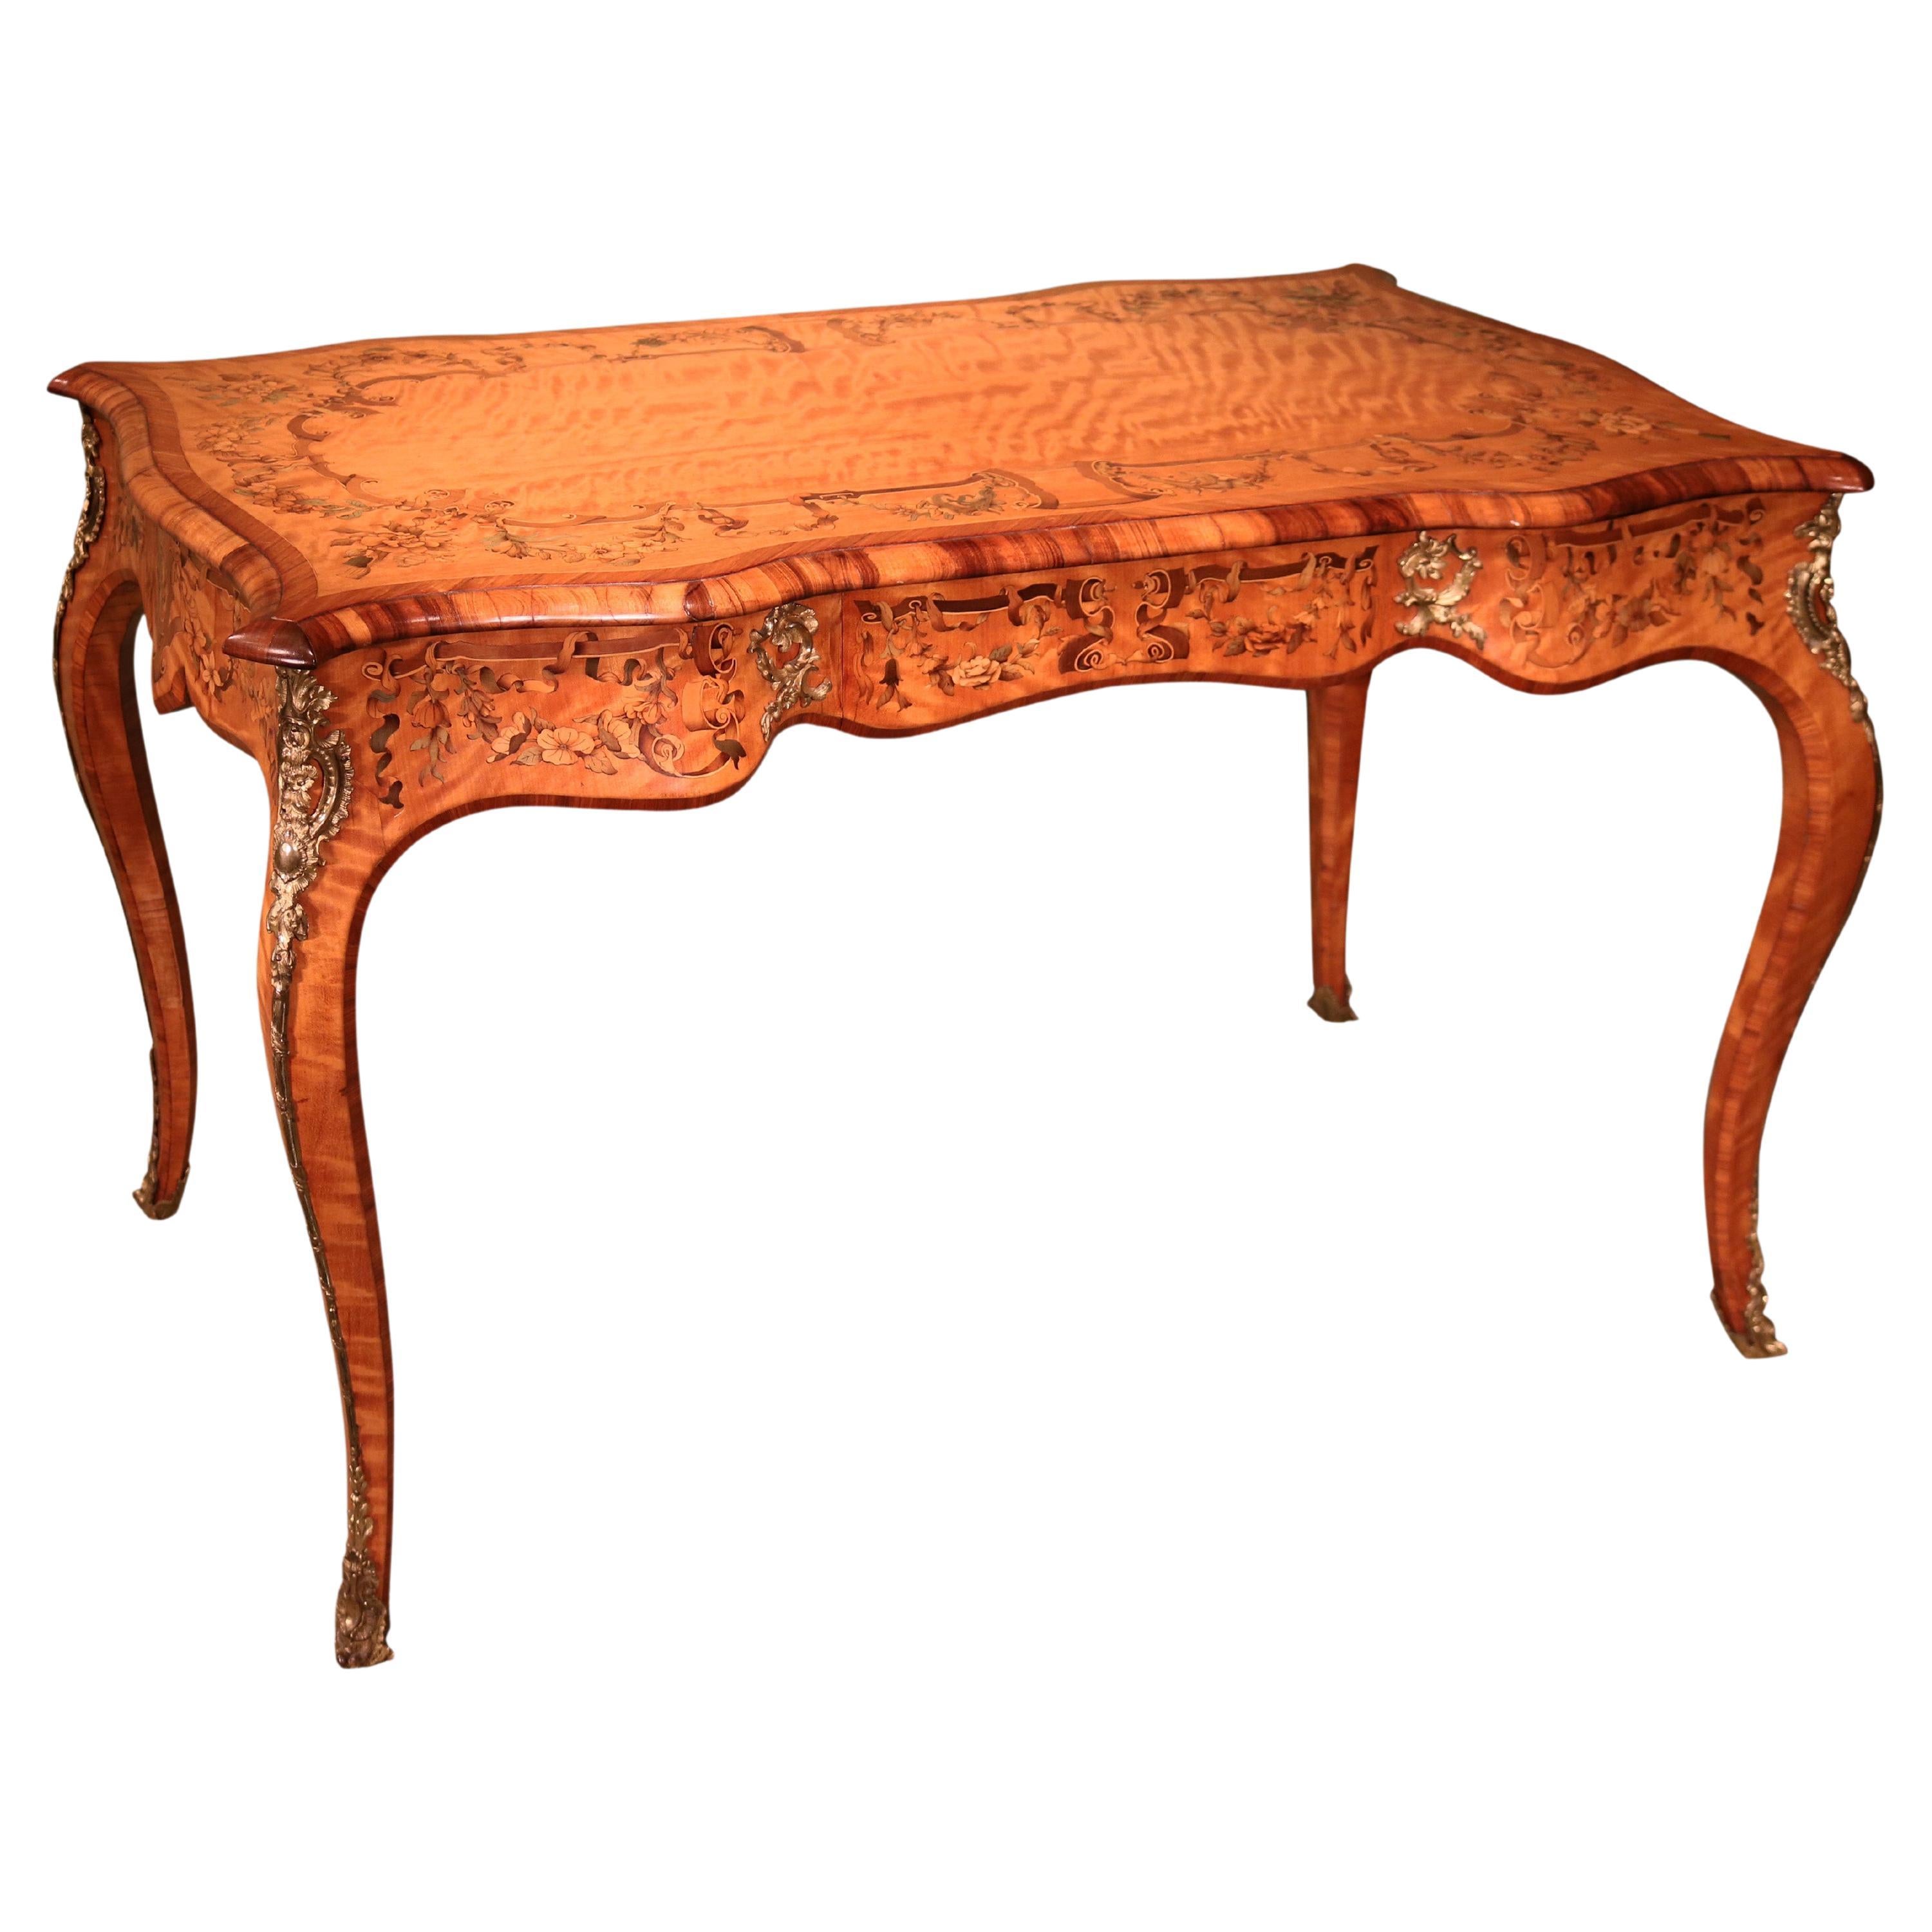 Antique mid 19th century satinwood, marquetry, and calamander writing table For Sale